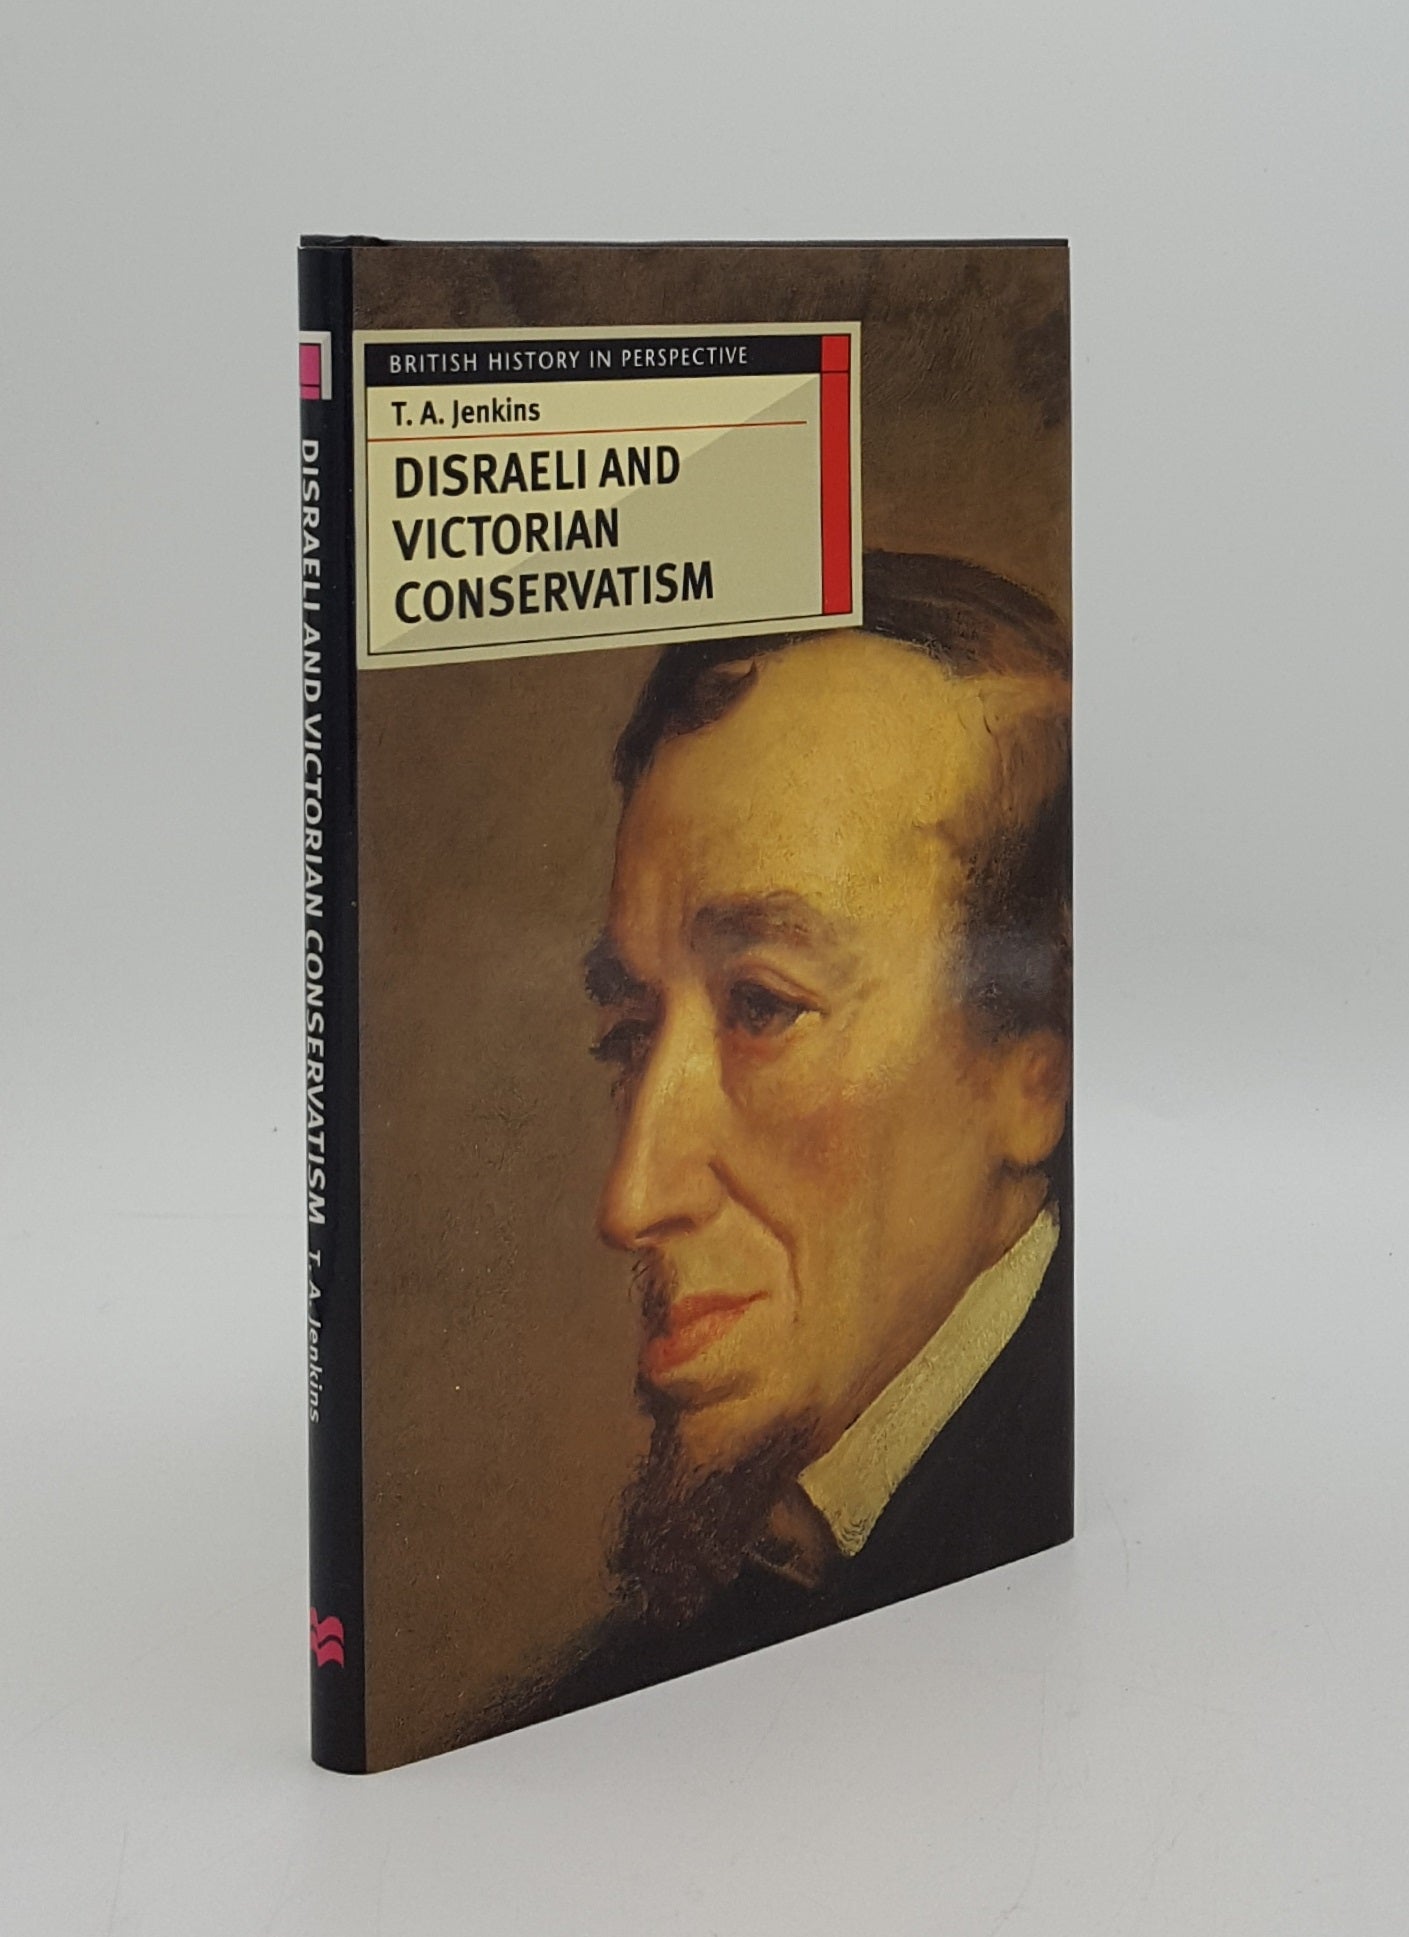 JENKINS T.A. - Disraeli and Victorian Conservatism (British History in Perspective)